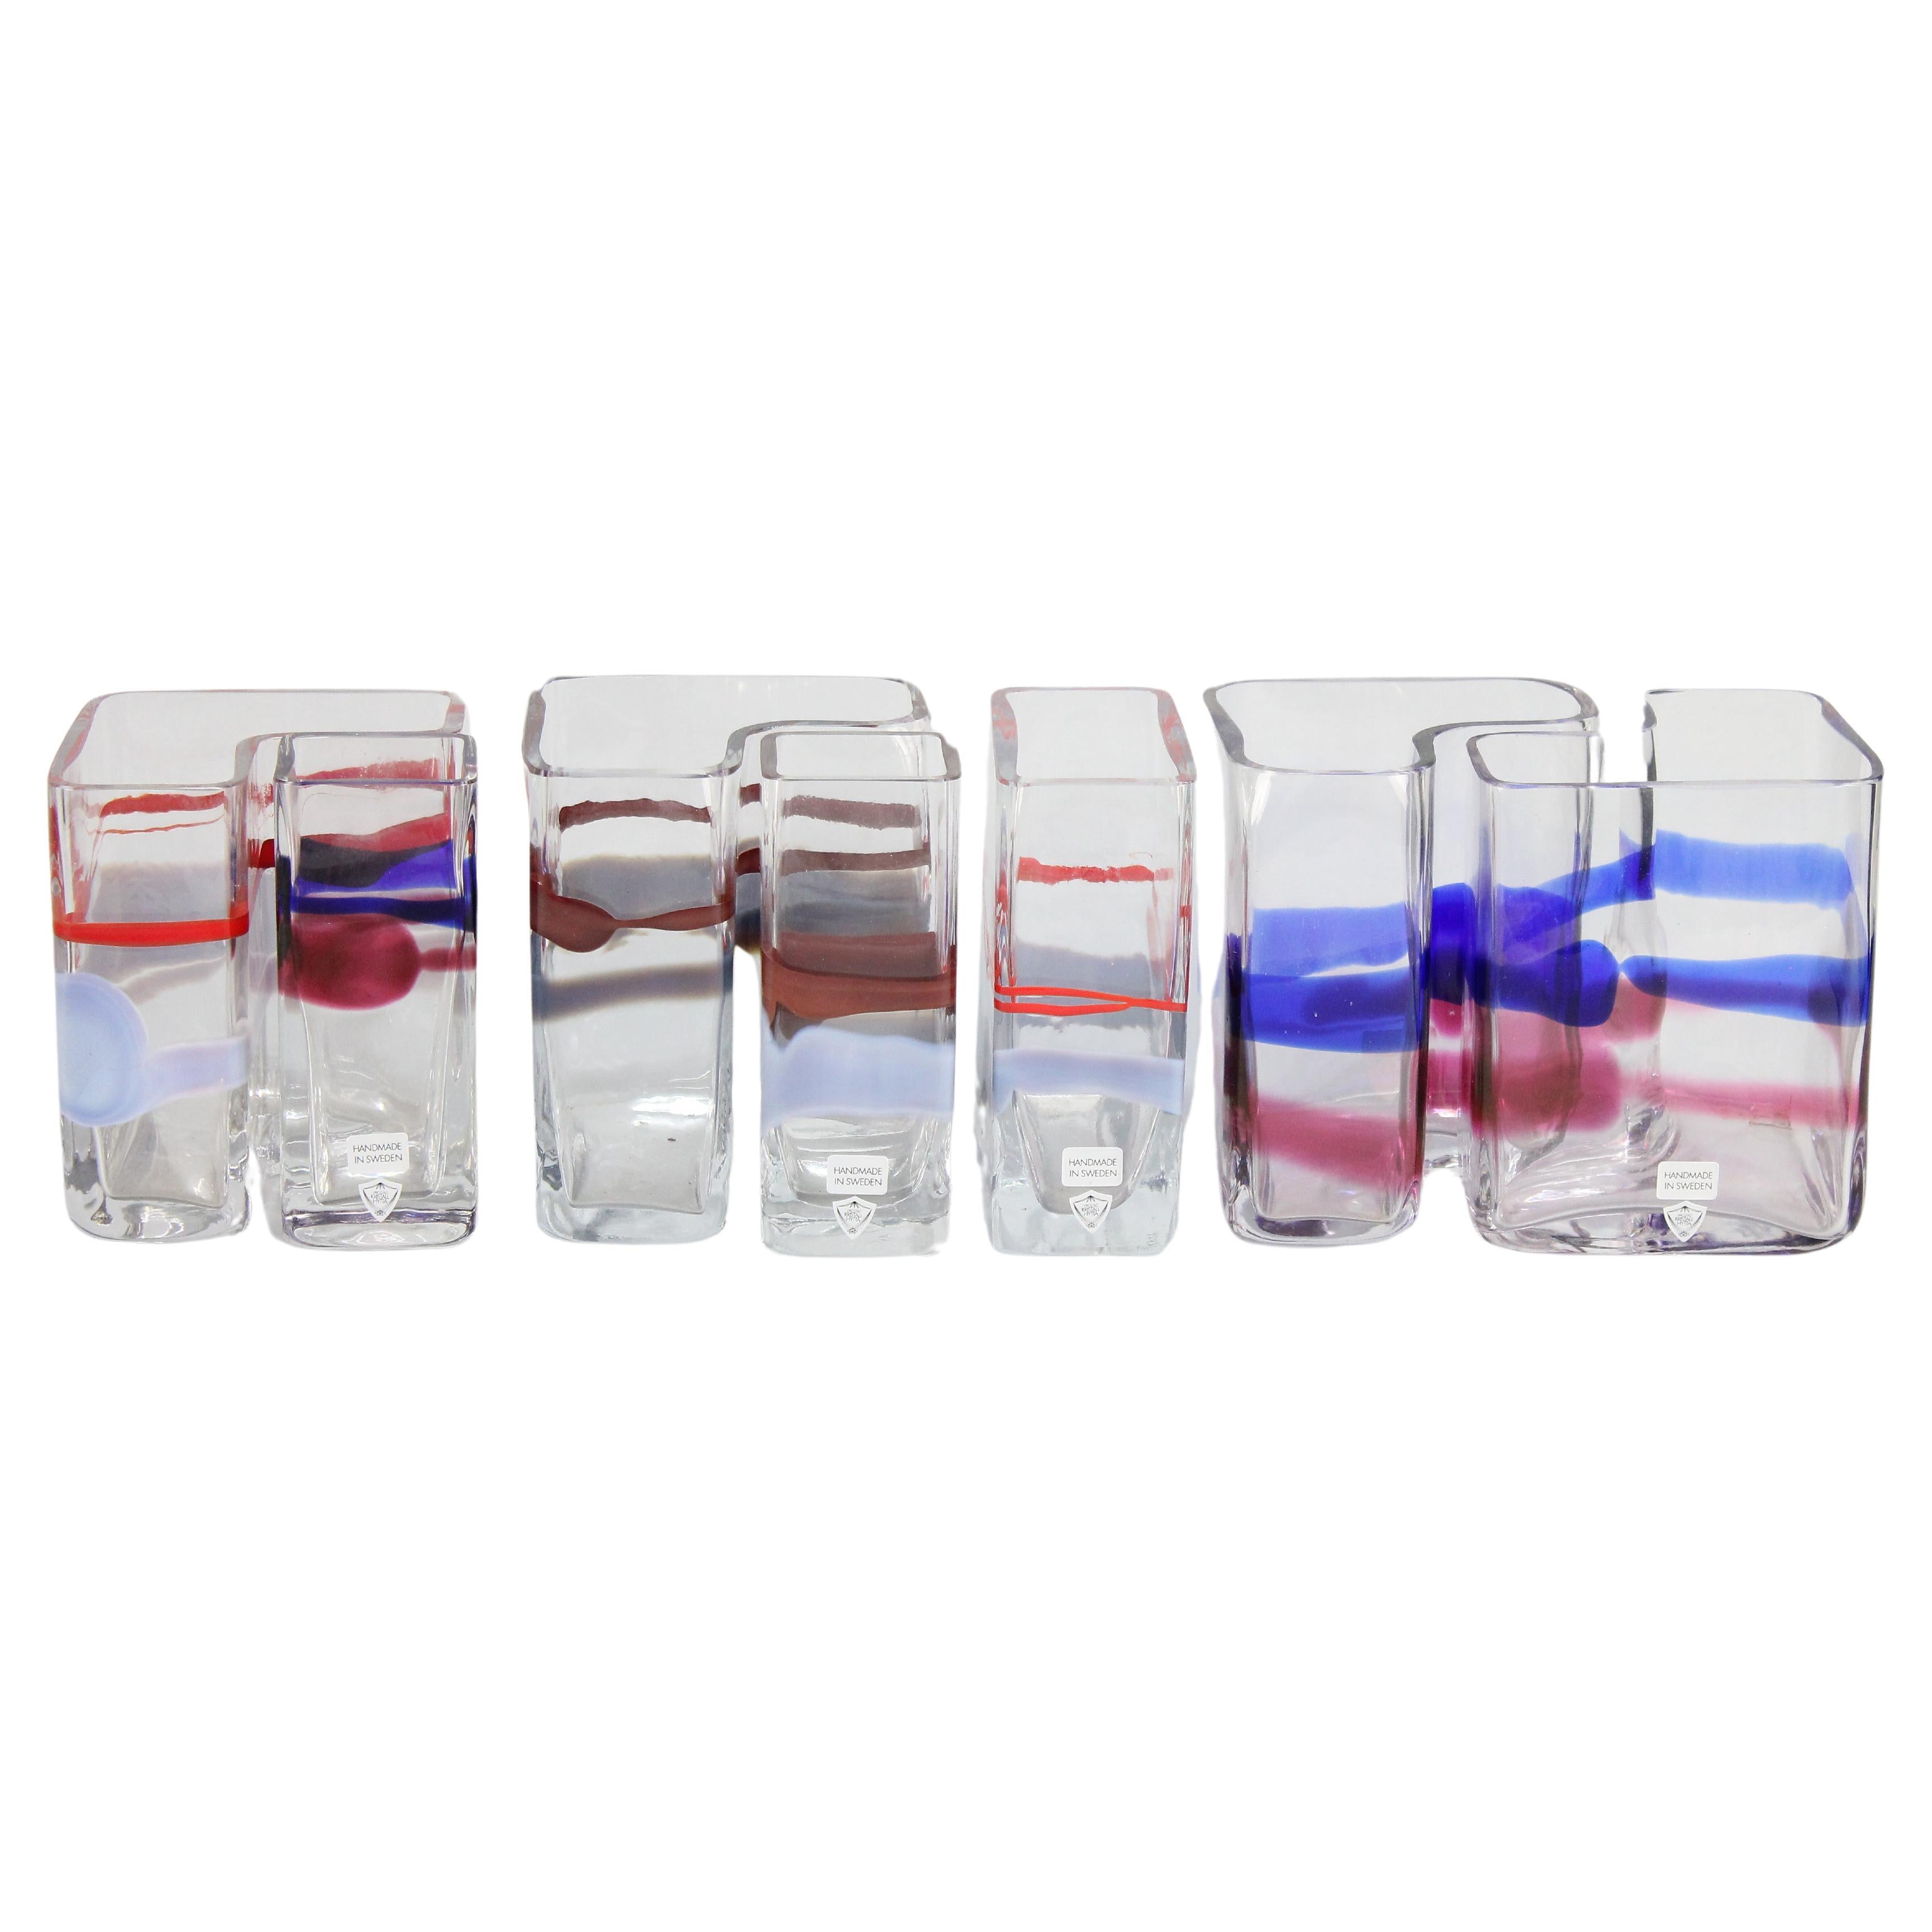 Wonderful set of seven modernist so called Puzzle Vases in glass designed 1986 by famous Swedish glassmaker Erik Höglund (1932-1998).

You can set up these vases in so many different variations. 
All hand blown and with different colors. Height 15cm